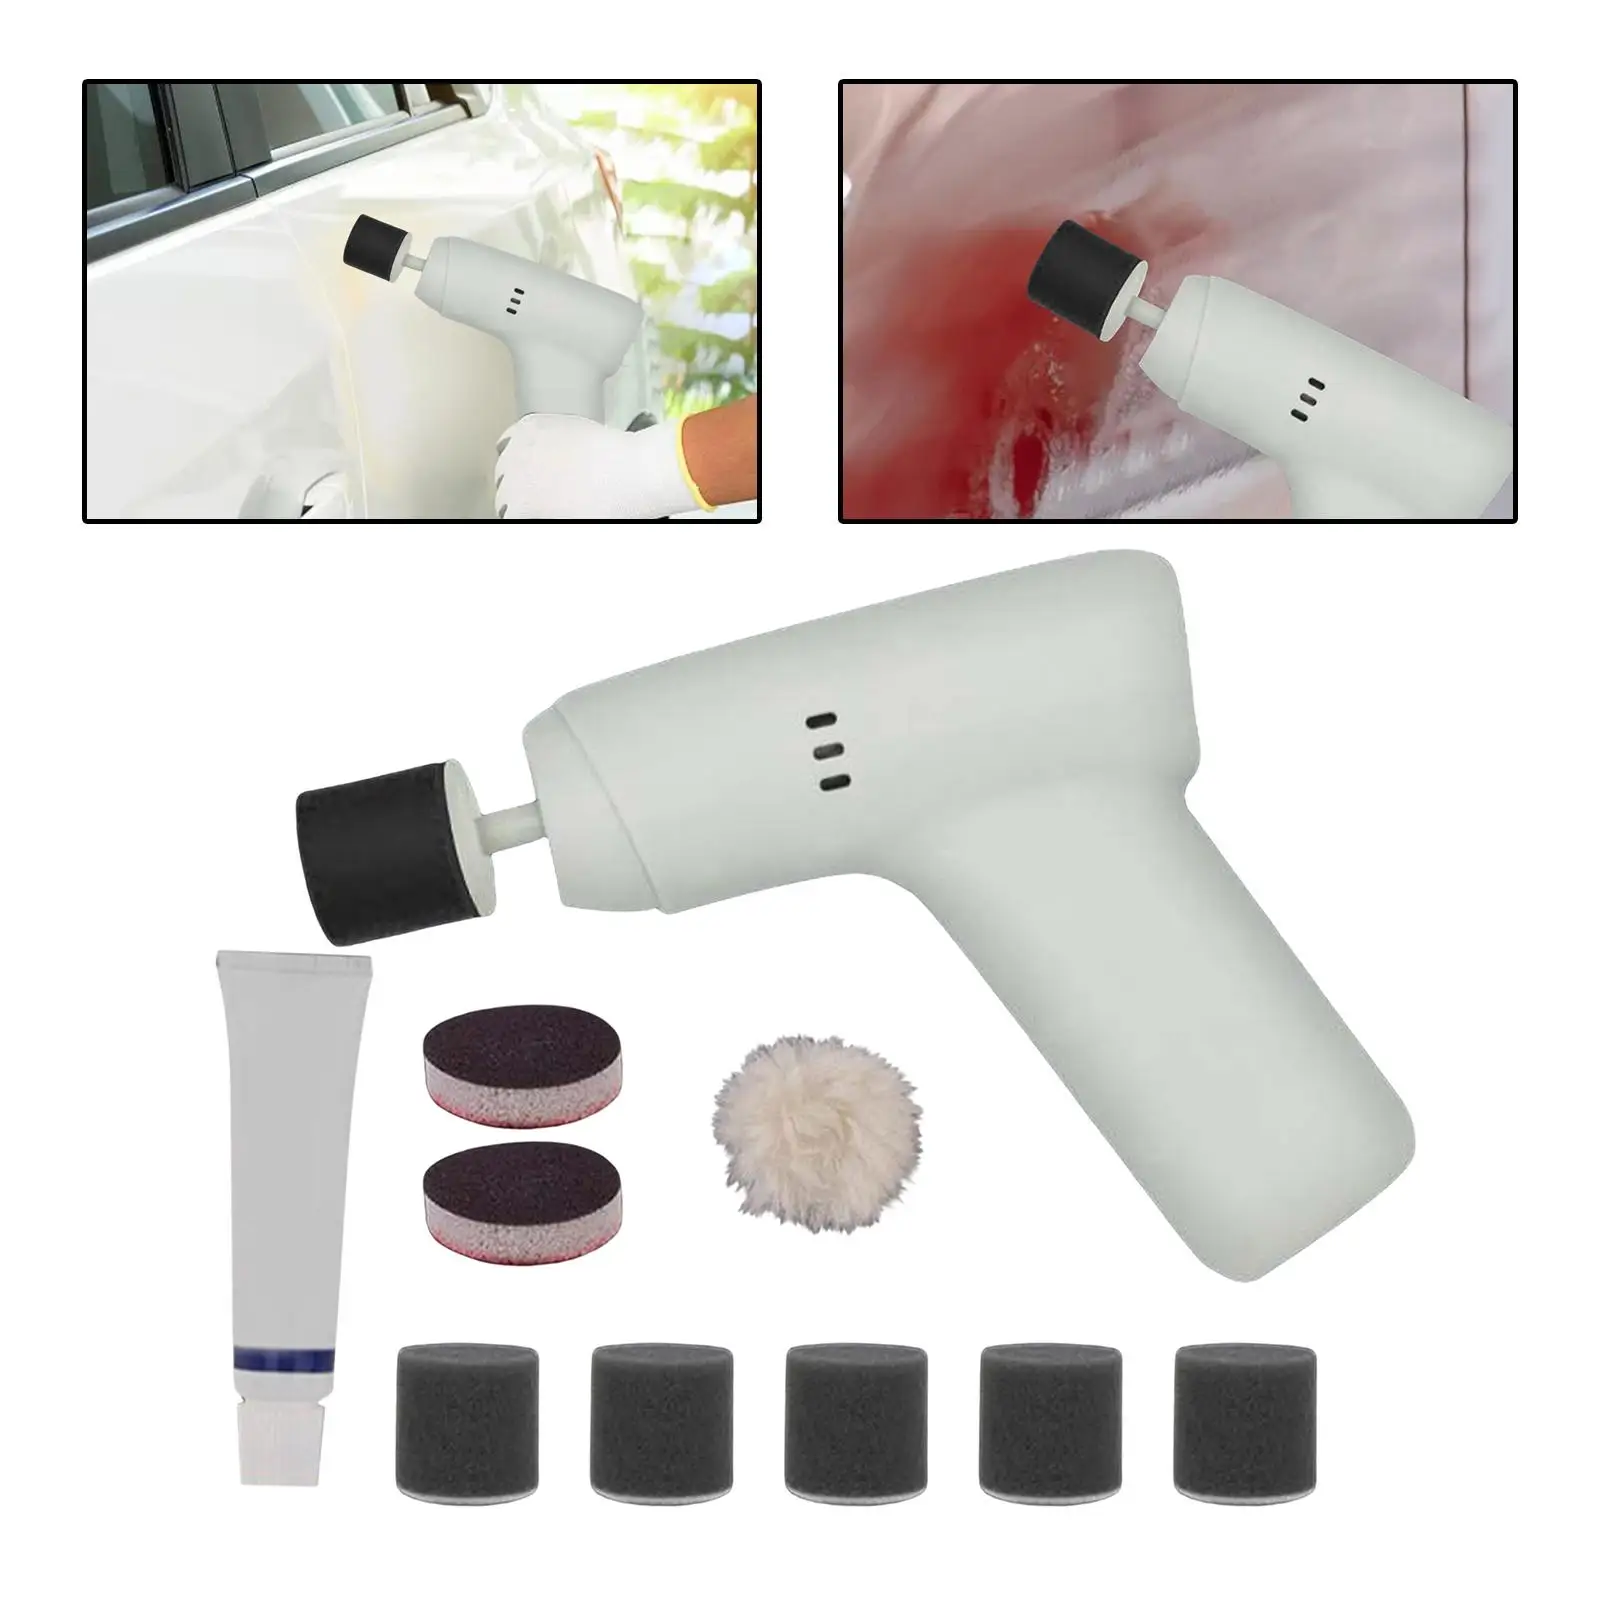 Electric Car Polisher 2 Variable Speeds Tool Buffer Fit for Car Detailing